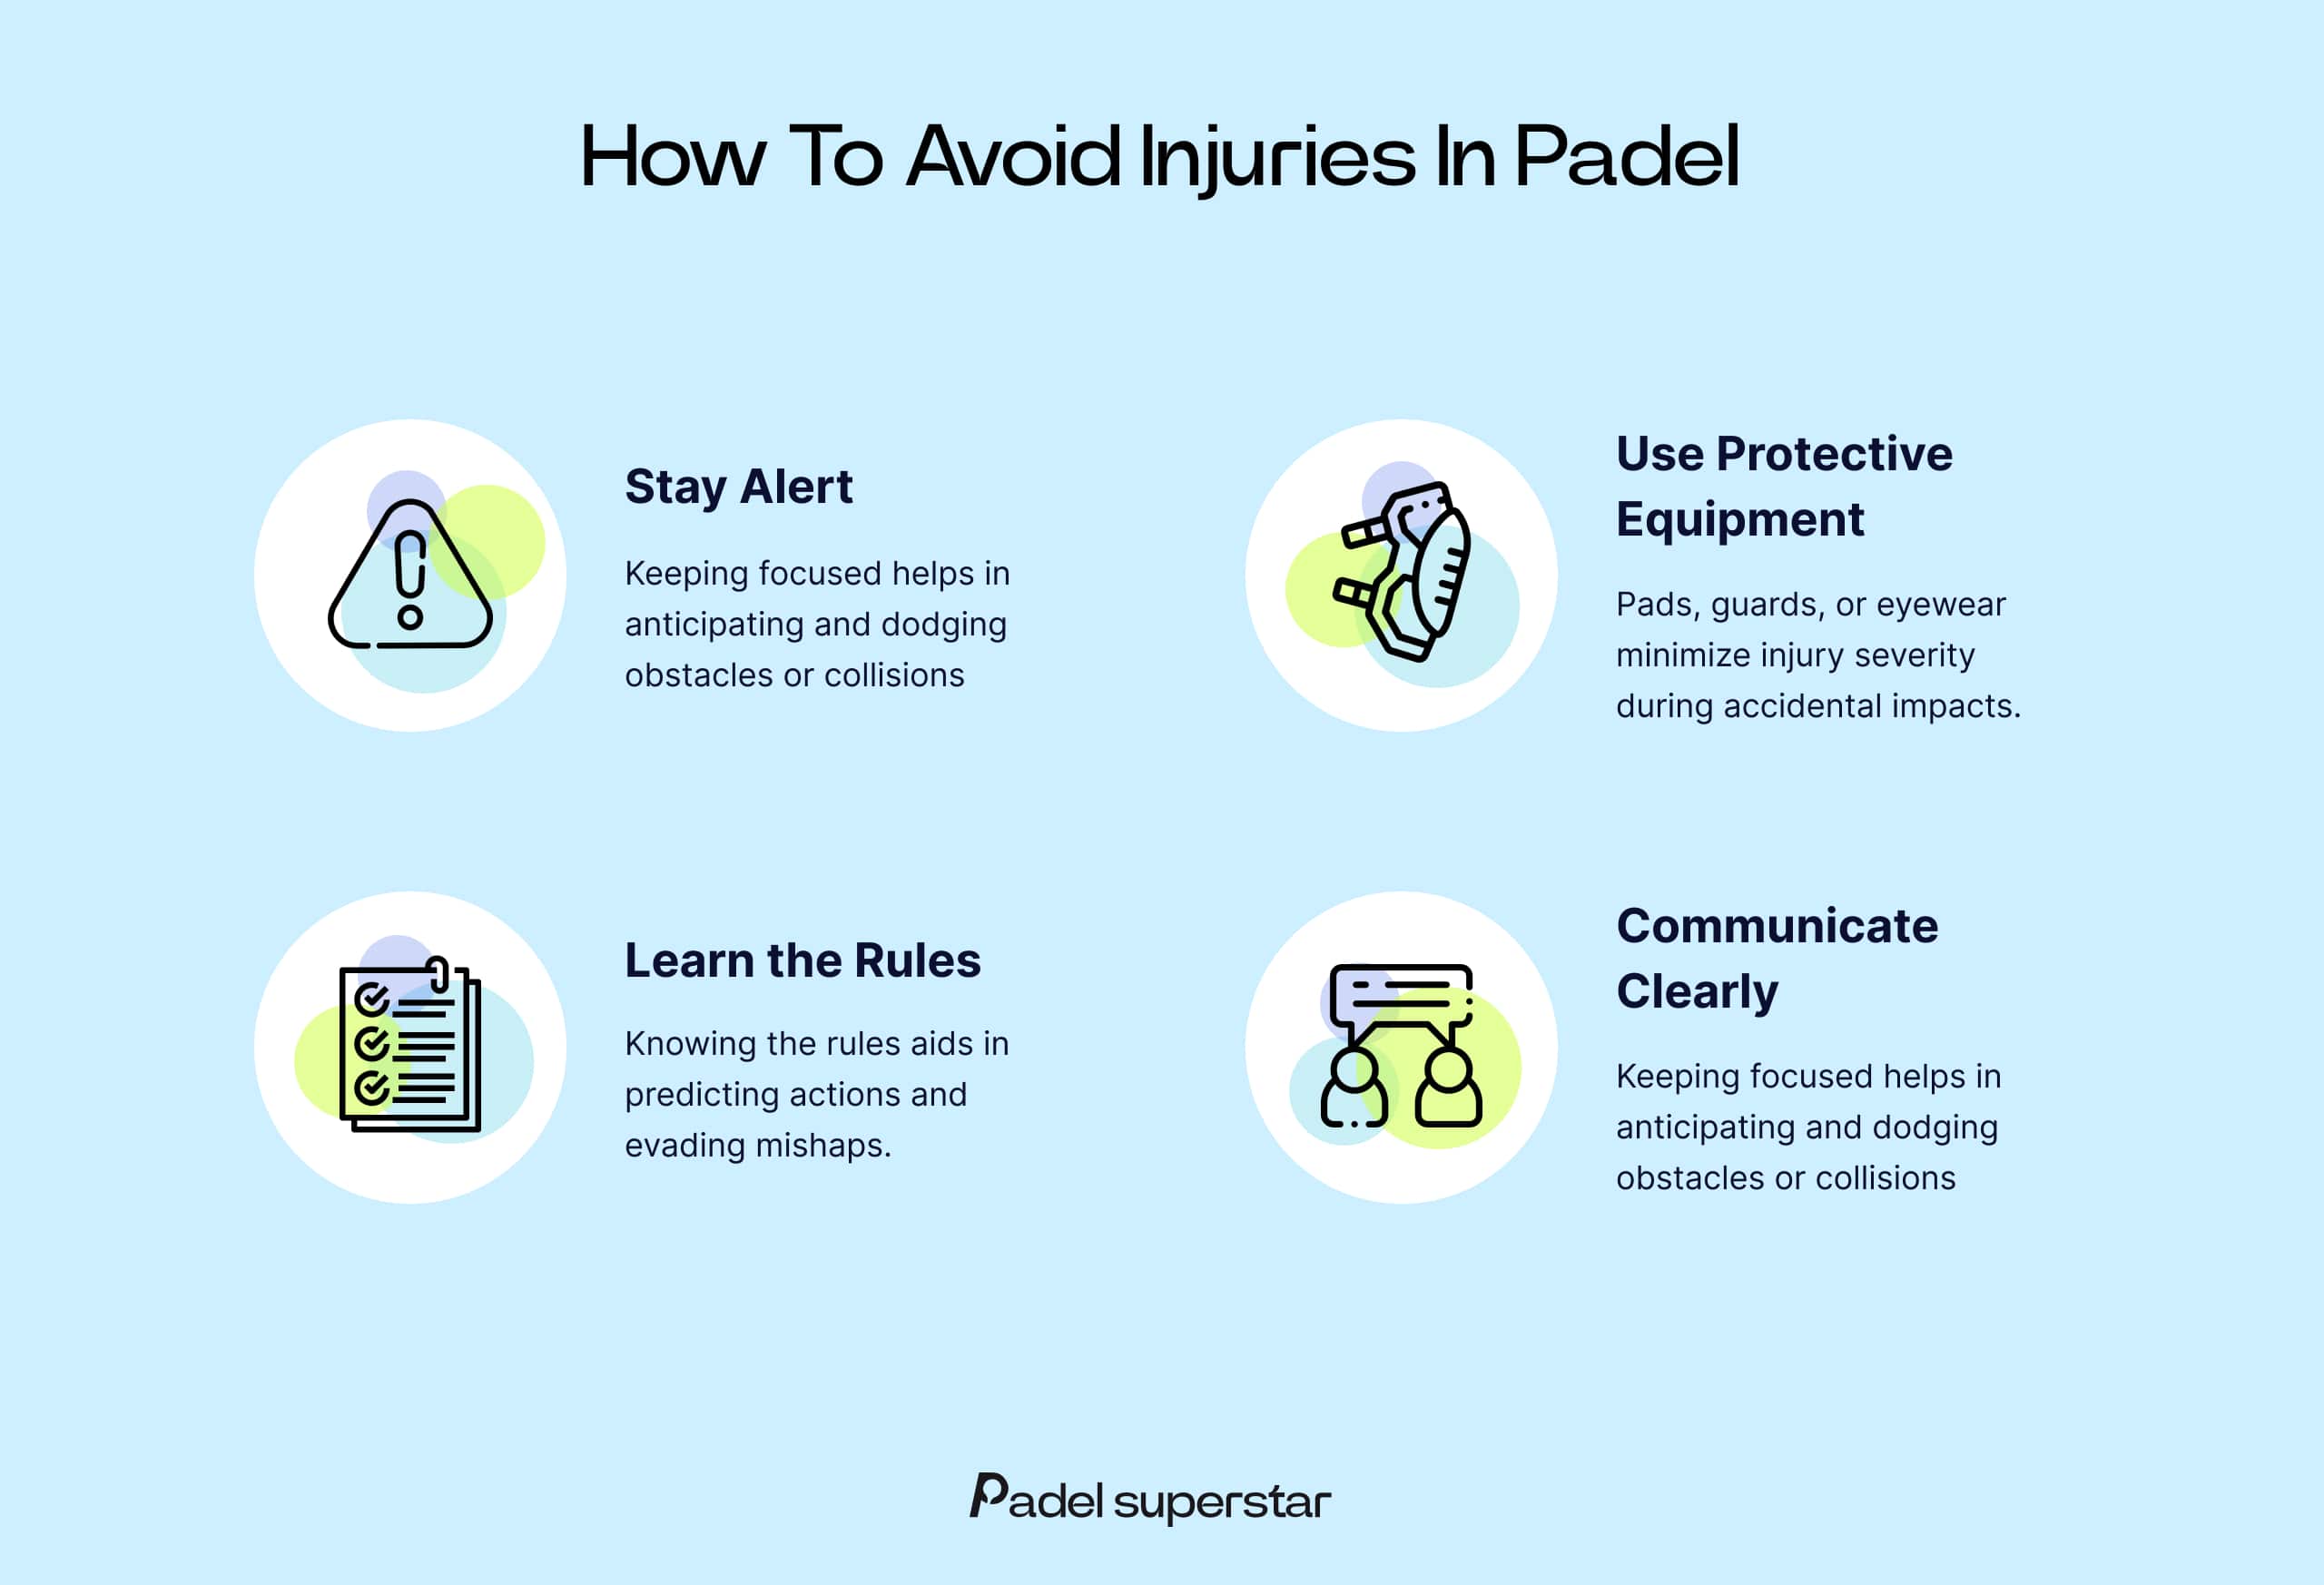 Overview of the techniques to avoid injuries in Padel